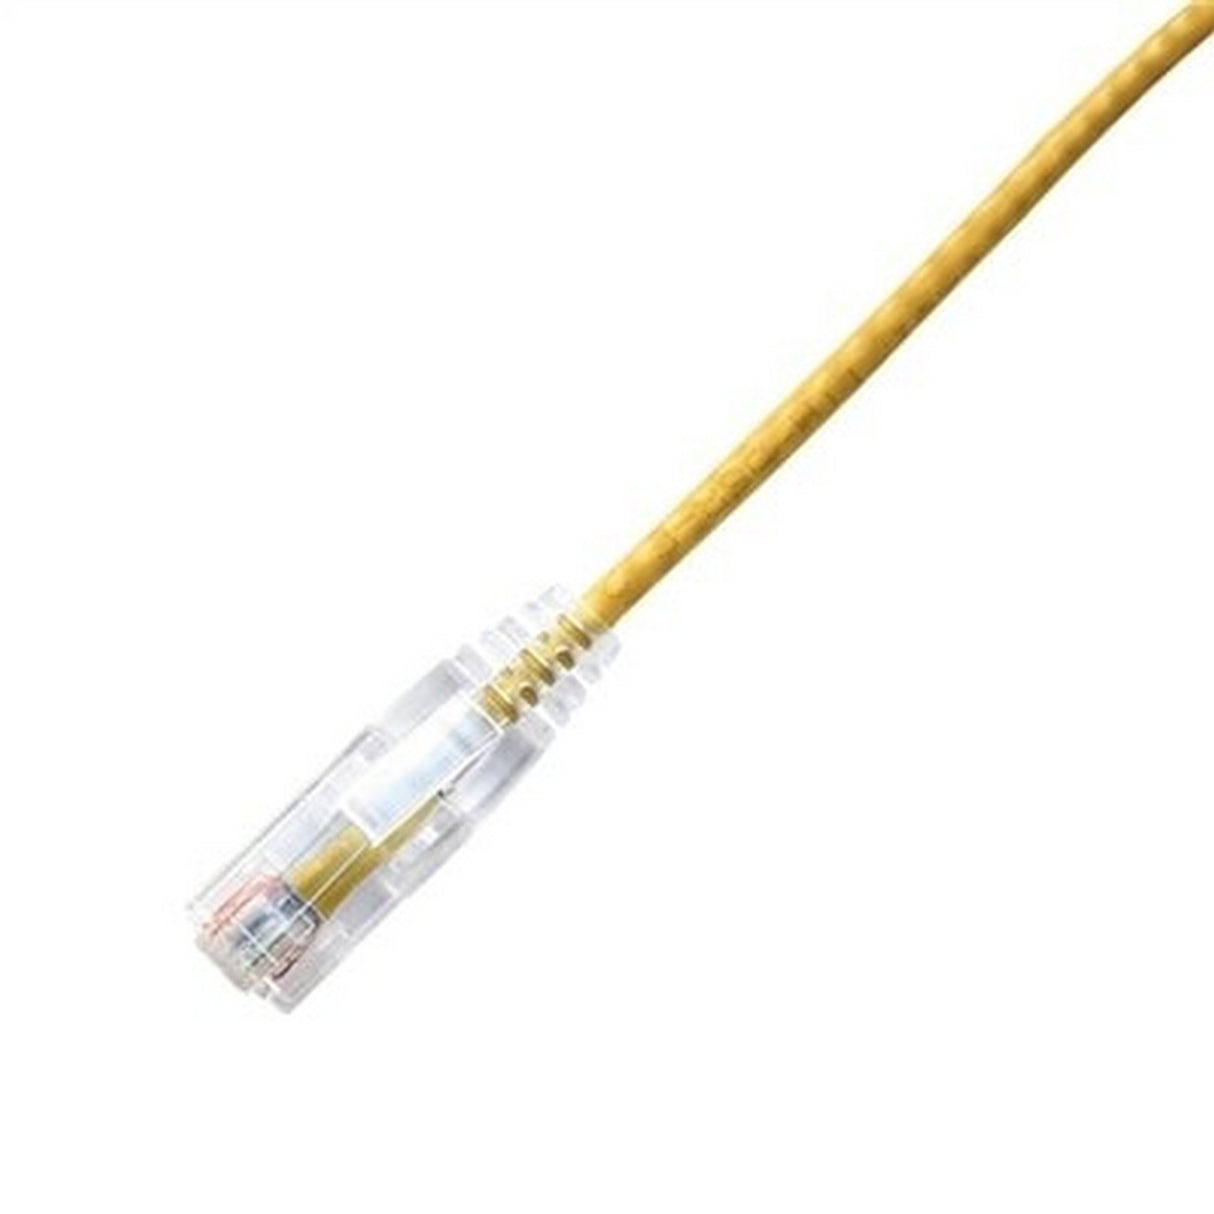 LYNN CPCS-AYE-004F CHOICE Slim 28AWG CAT6A Ethernet Patch Cable, 4-Foot, Yellow